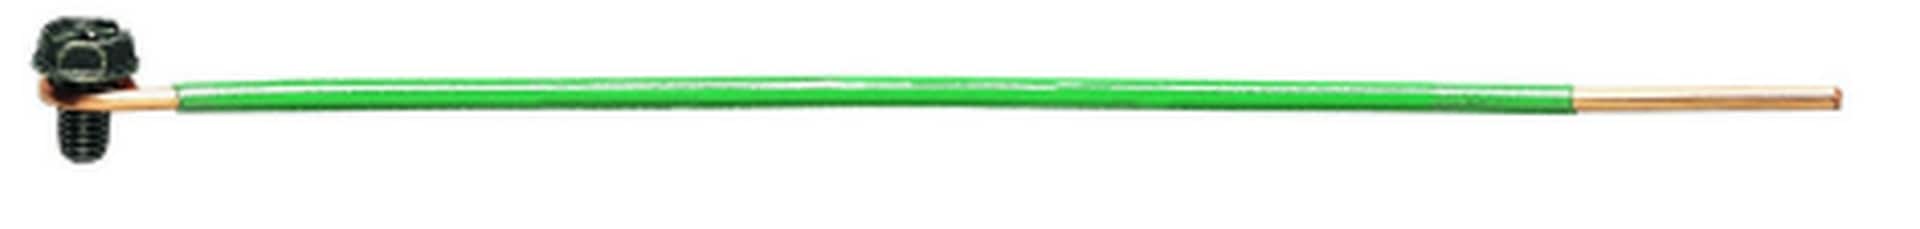 IDEAL 12" 12AWG Solid Wire Grounding Pigtail with Loop and Ground Screw - 1000 Bulk Pack - Green